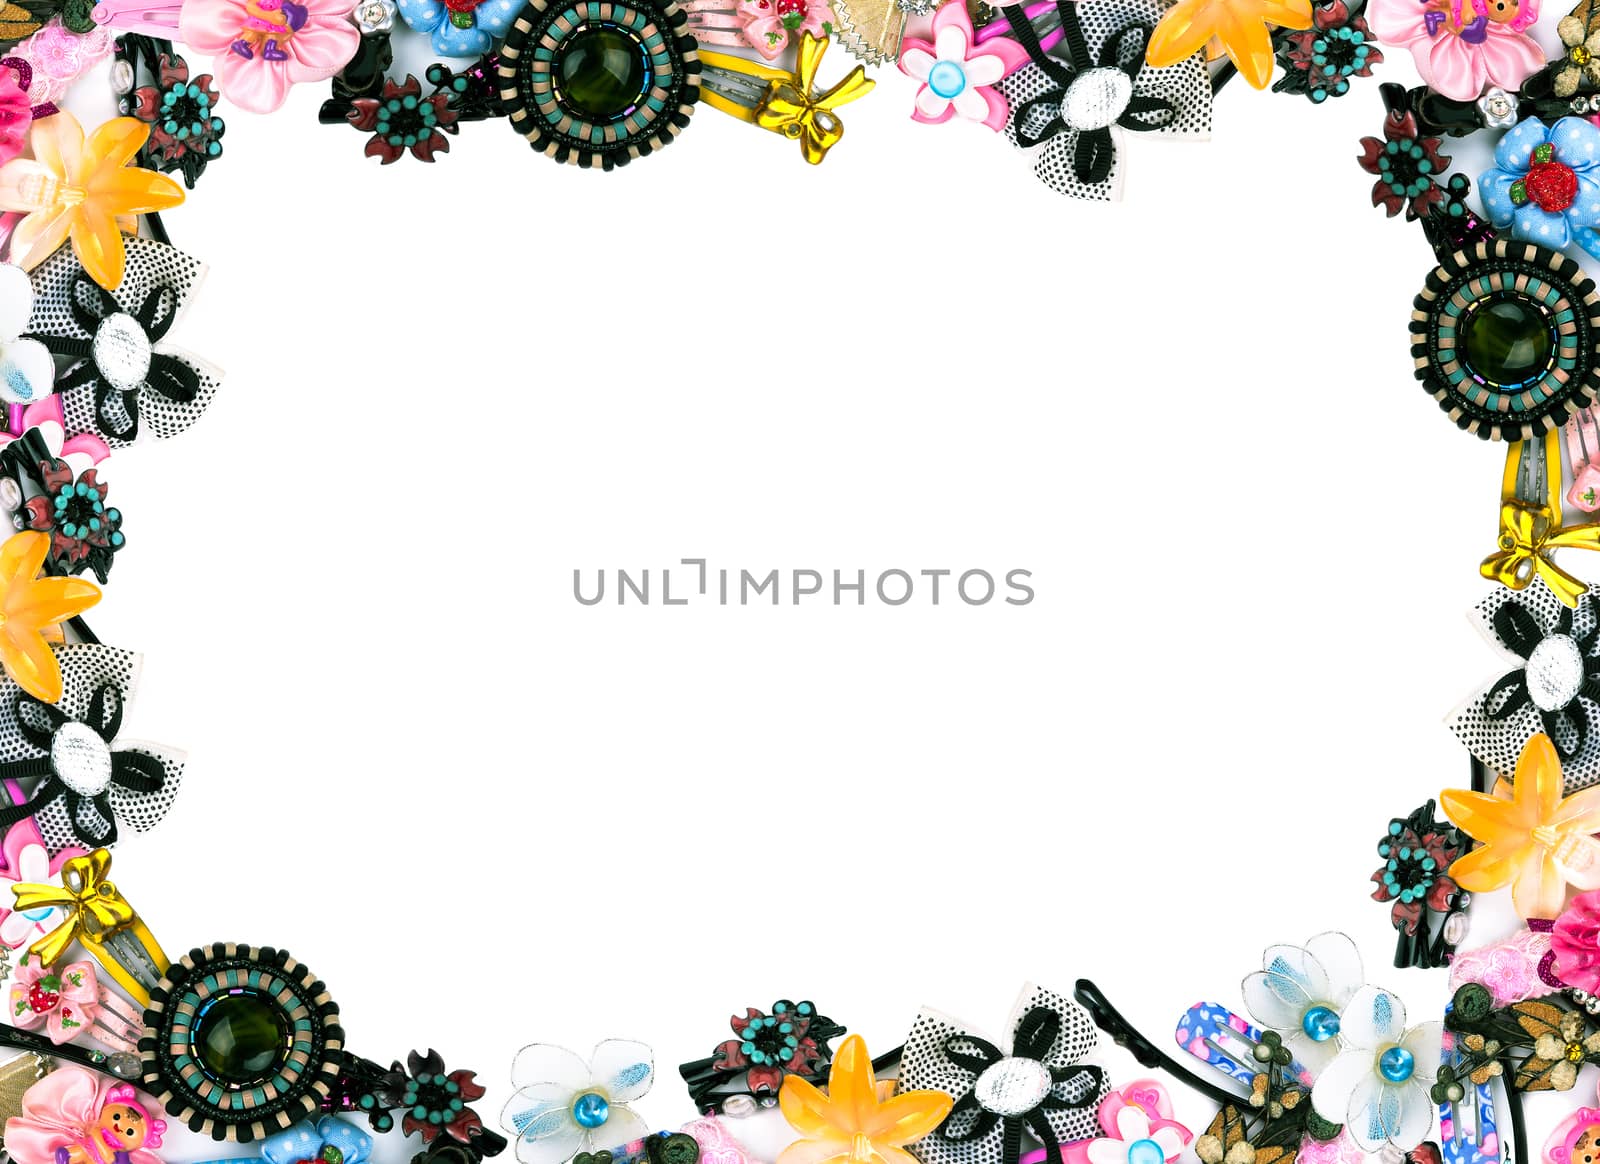 Rectangular decorative frame of the children's variety of colorful pins on a white background